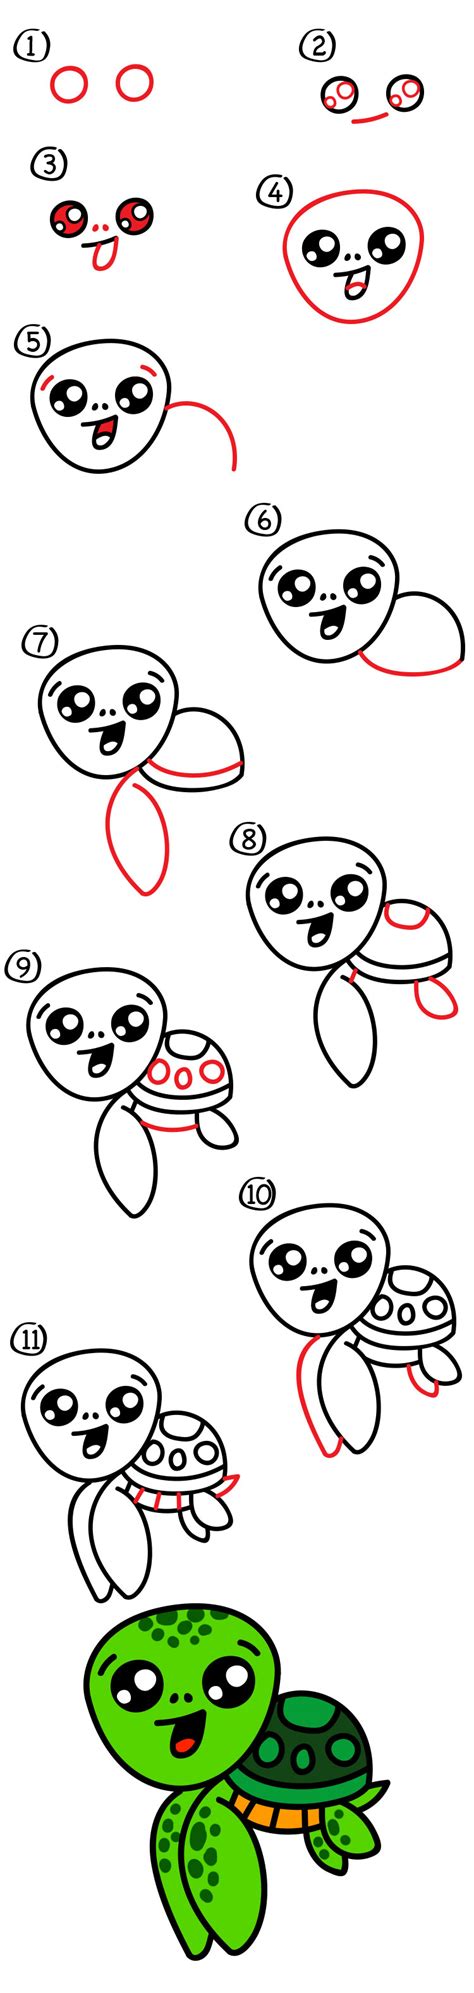 How To Draw A Turtle Step By Step Easy For Kids Turtle Sea Cartoon